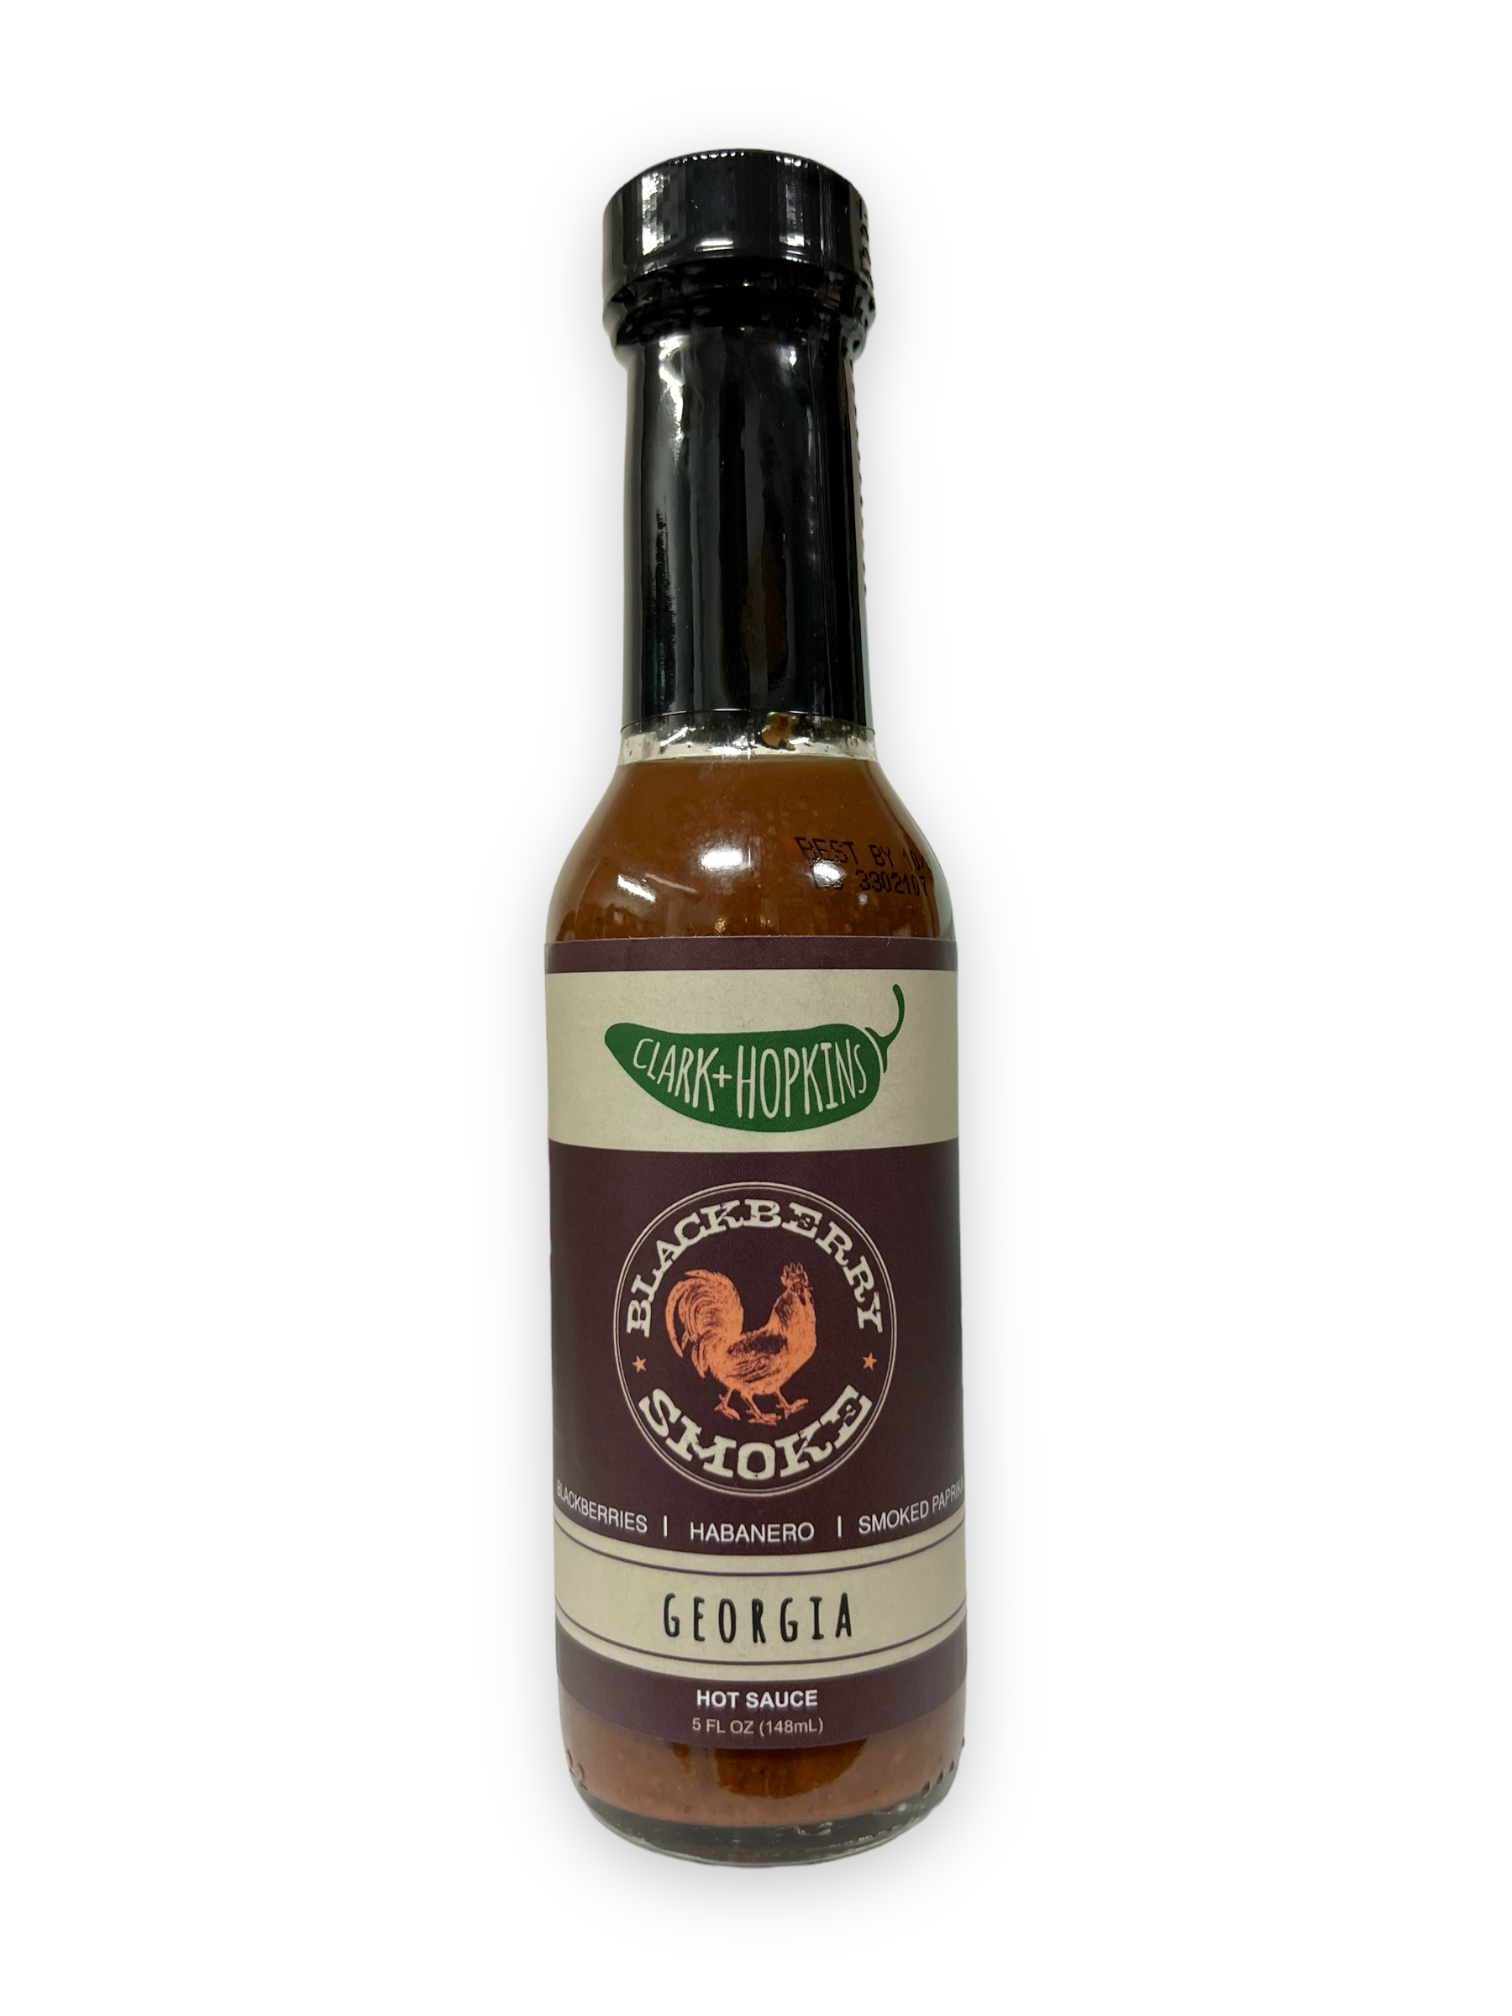 Blackberry Smoke Habanero smoked Paprika Blackberries Hot Sauce, Georgia by Clark and Hopkins, Sold by Le Monkey House